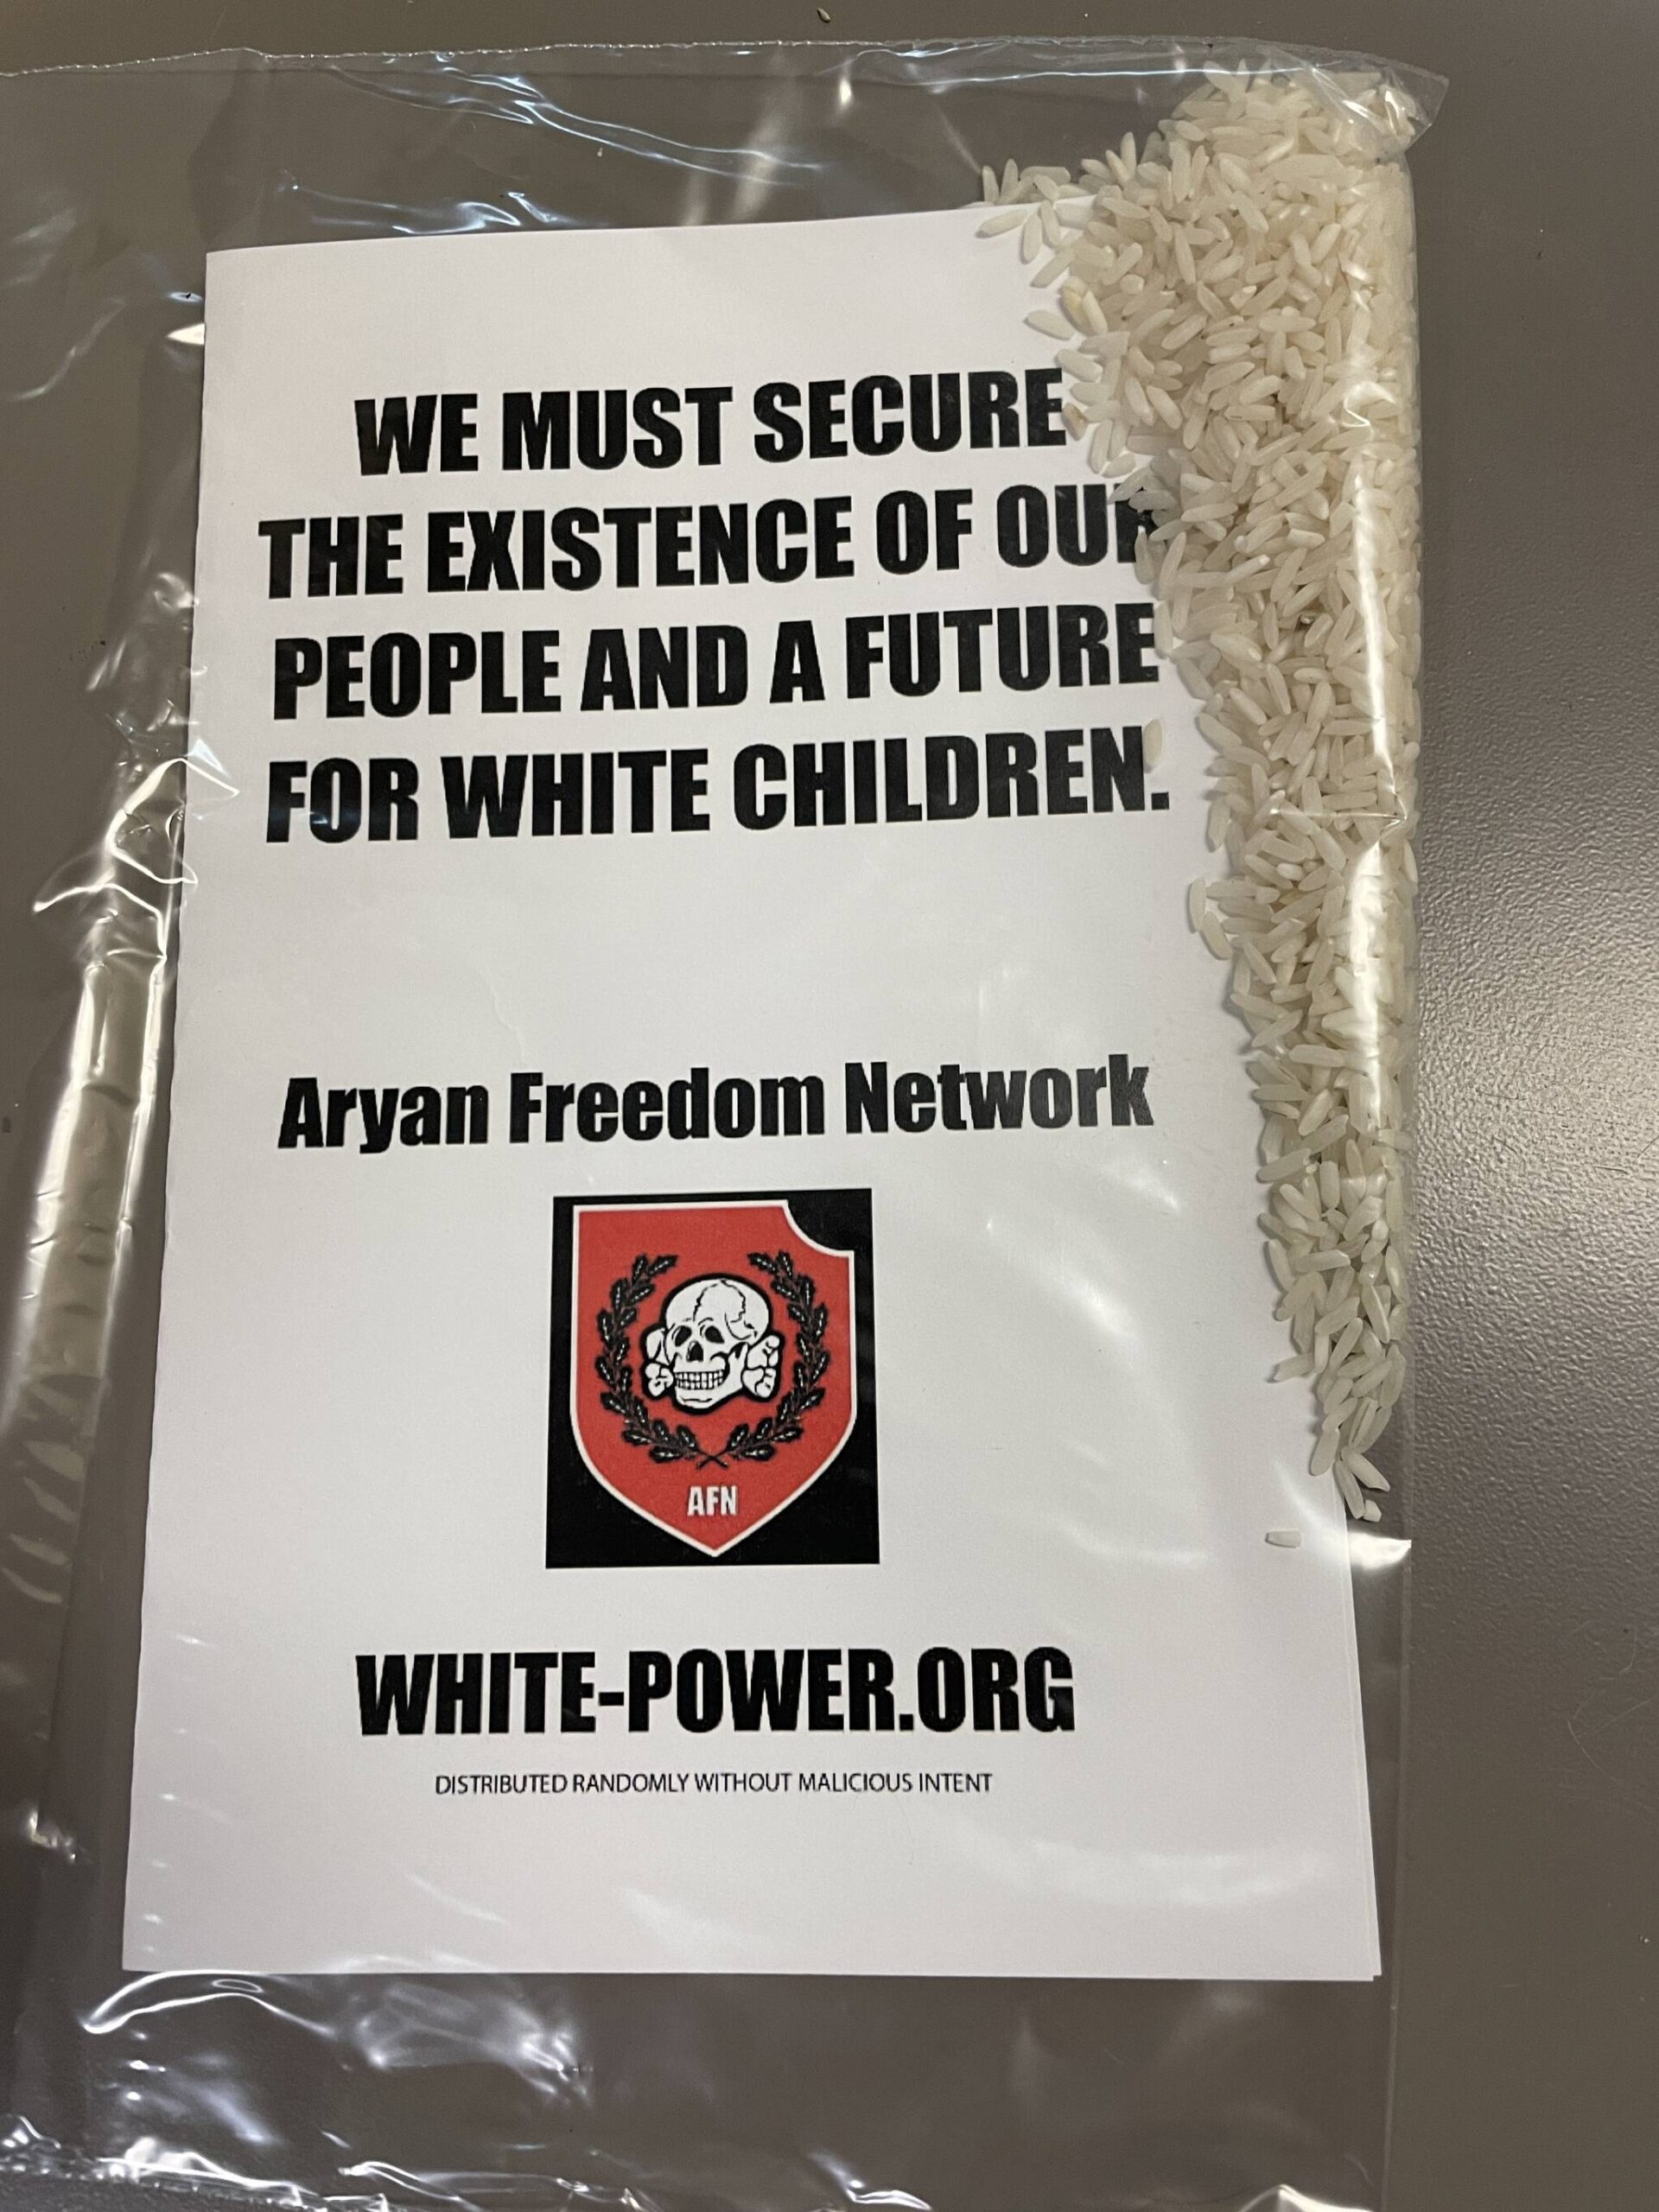 Michael S. Lockett / The Daily World
Flyers for a Texas-based neo-Nazi group were left outside of Grays Harbor homes and businesses late Monday or early Tuesday.